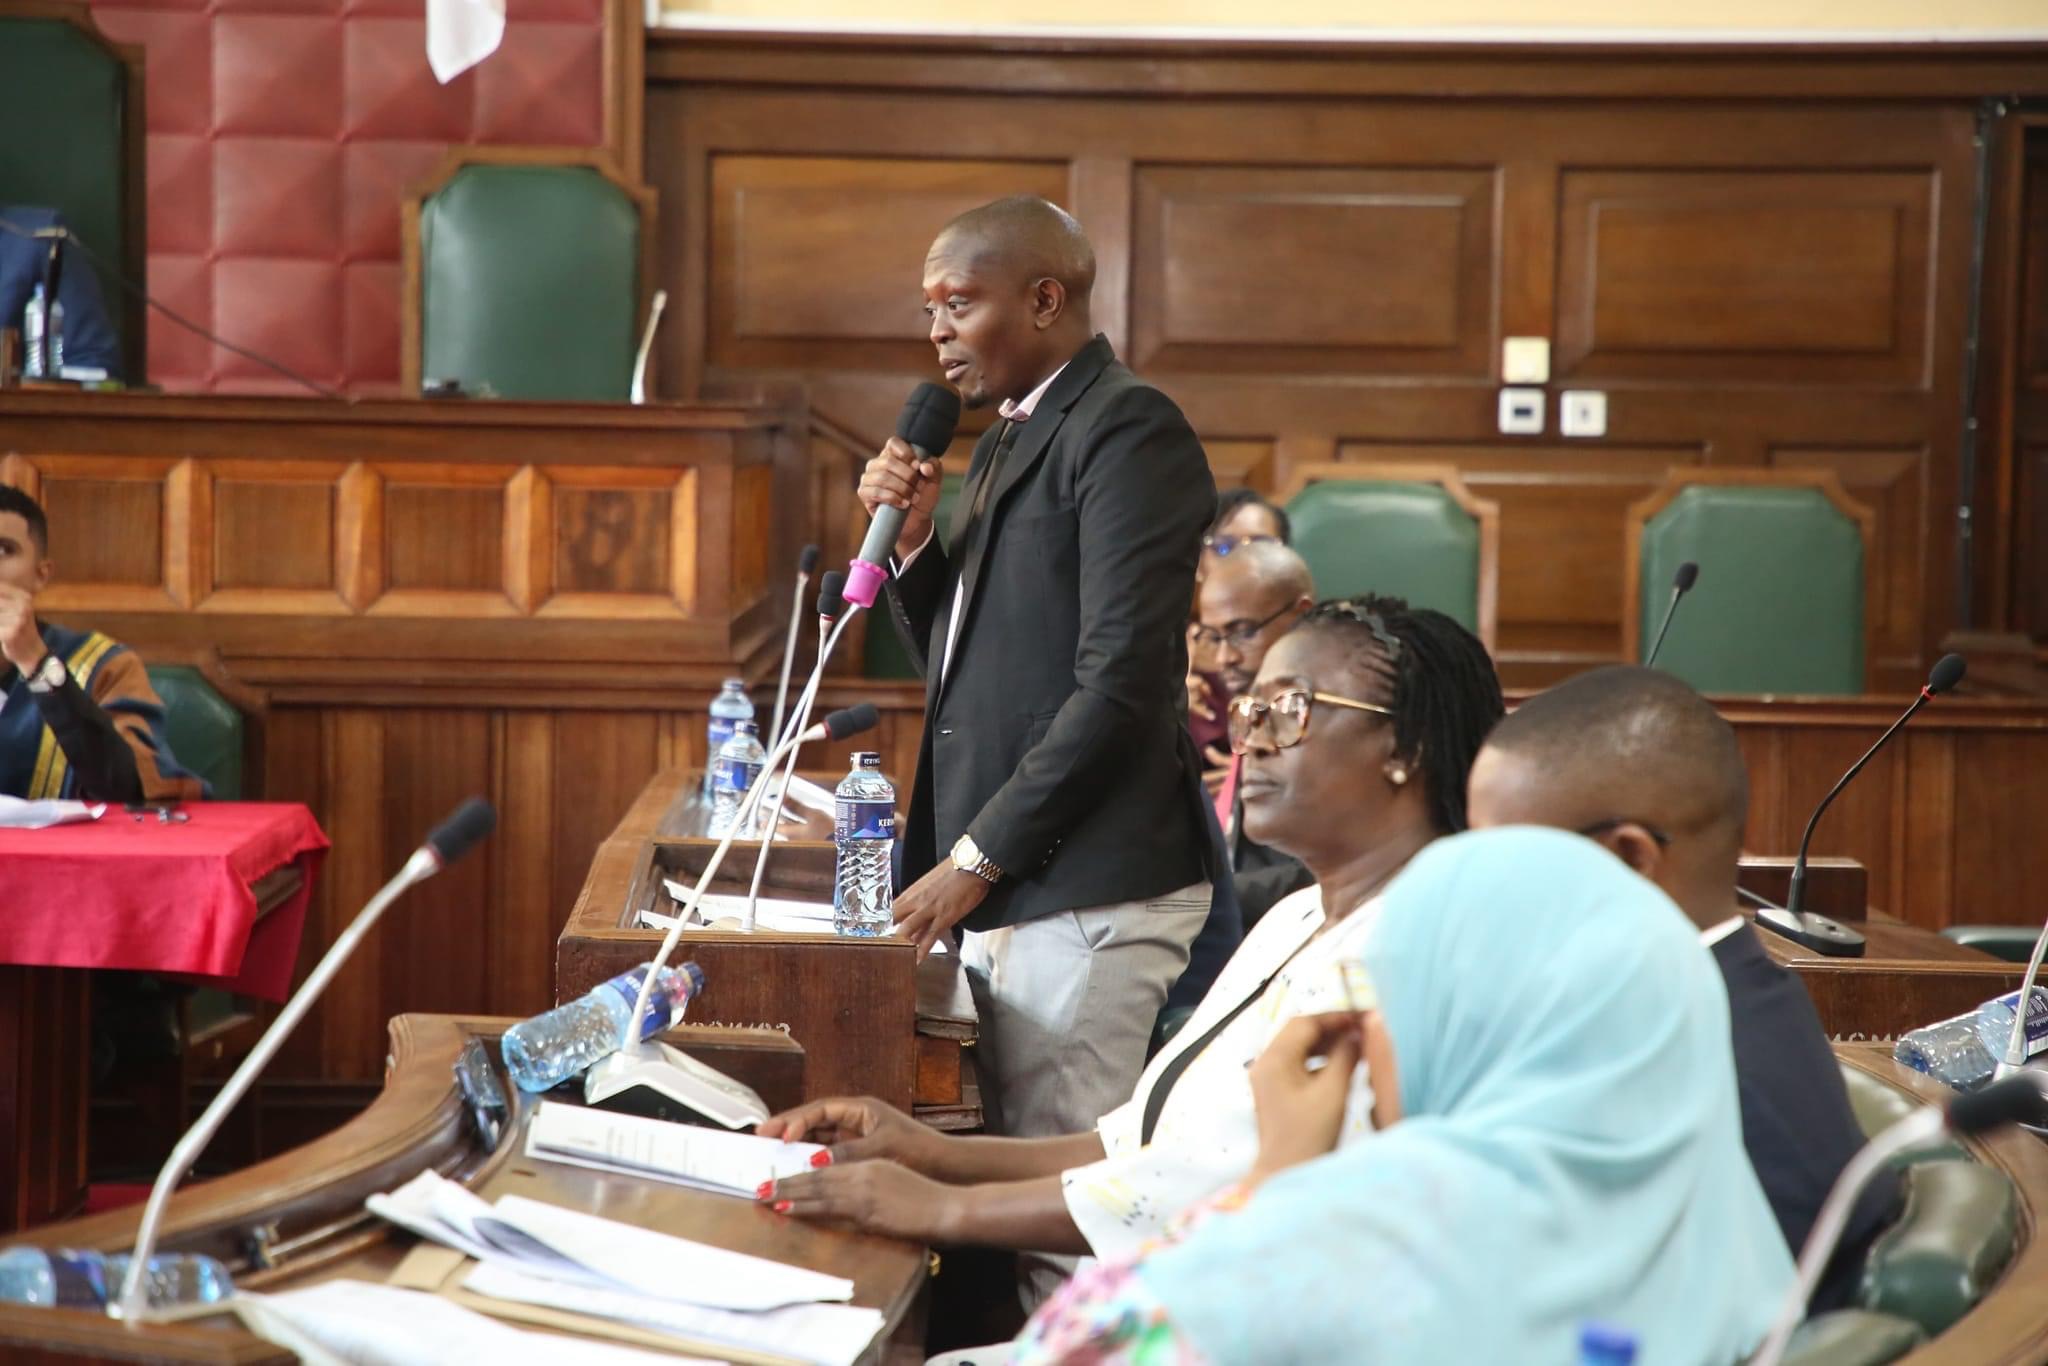 Mombasa County approves use of Kiswahili during assembly sessions on Wednesdays